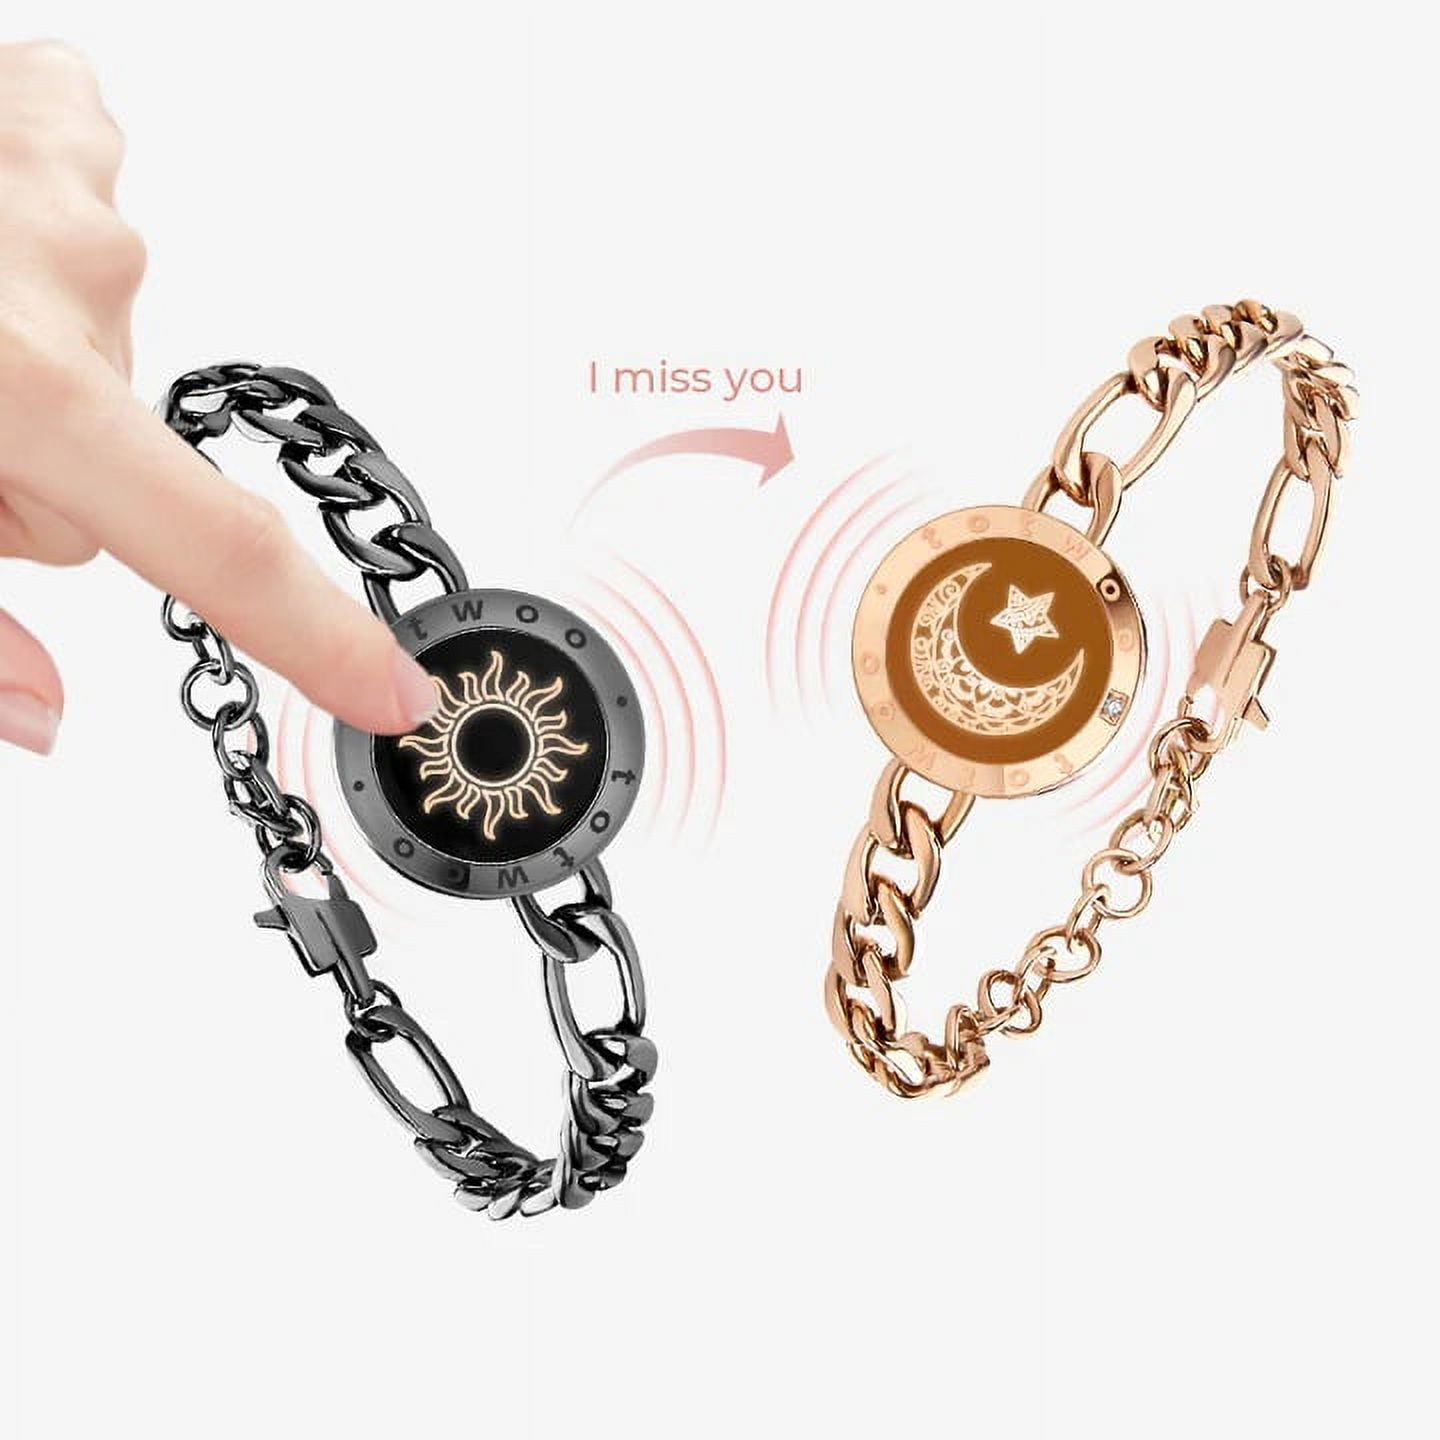 Totwoo Long Distance Touch Bracelets for Couples Relationship Light  up&Vibrate Smart Bracelets Bluetooth Connecting Jewelry-Sun&Moon Snake  Chain Black Gold 